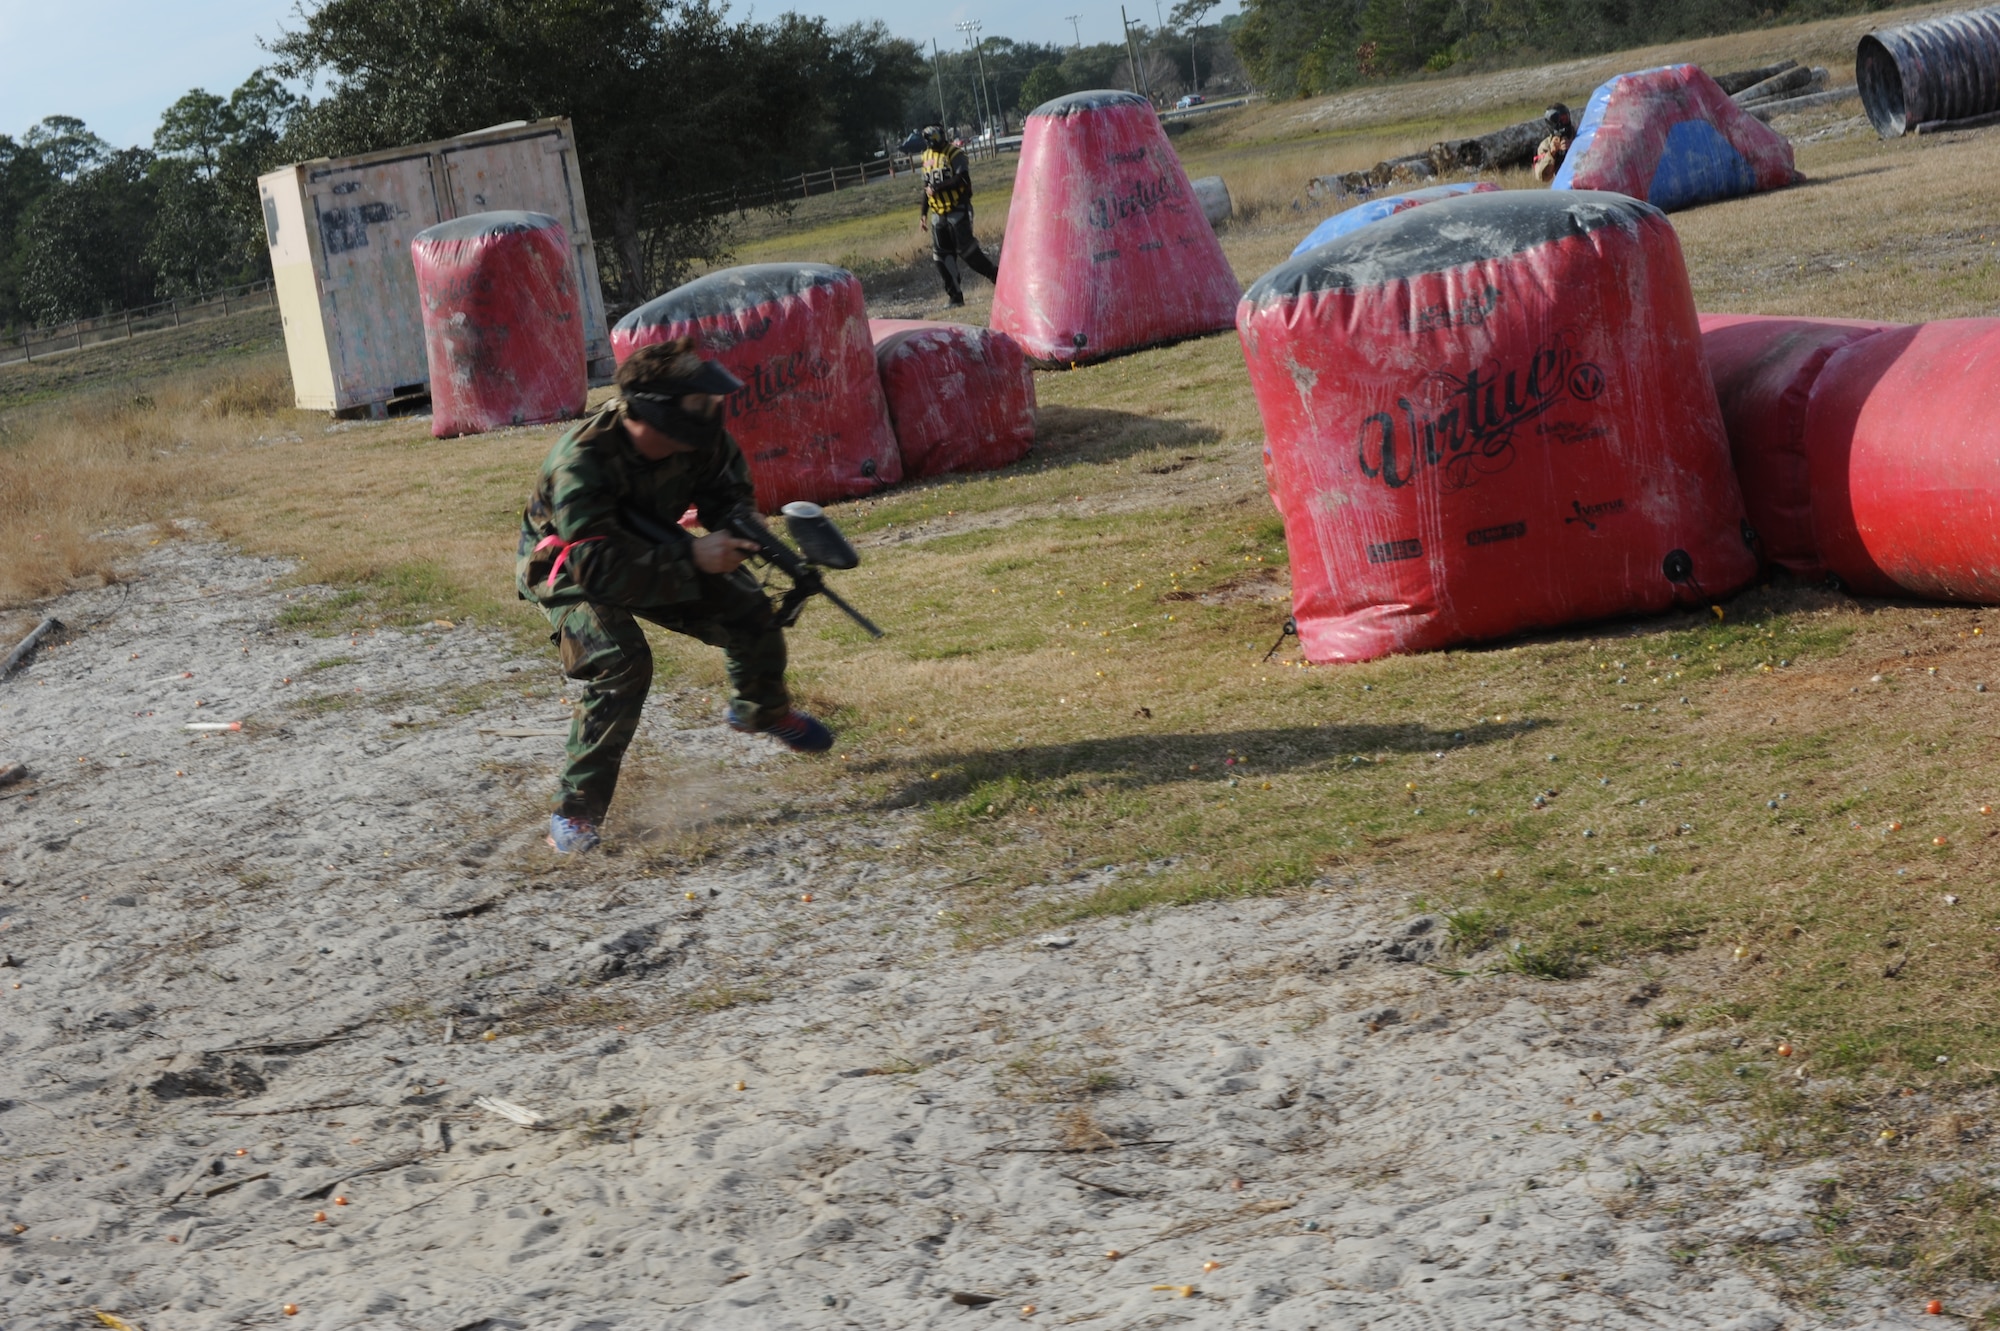 A Hurlburt Airman heads for cover during a rapid-action paintball match at the base paintball field at Hurlburt Field, Fla., Jan. 25, 2013. The rapid-action game, which pitted two teams against each other in a half-acre size field, were over in as little as five minutes. (U.S. Air Force photo / Senior Airman Joe McFadden)